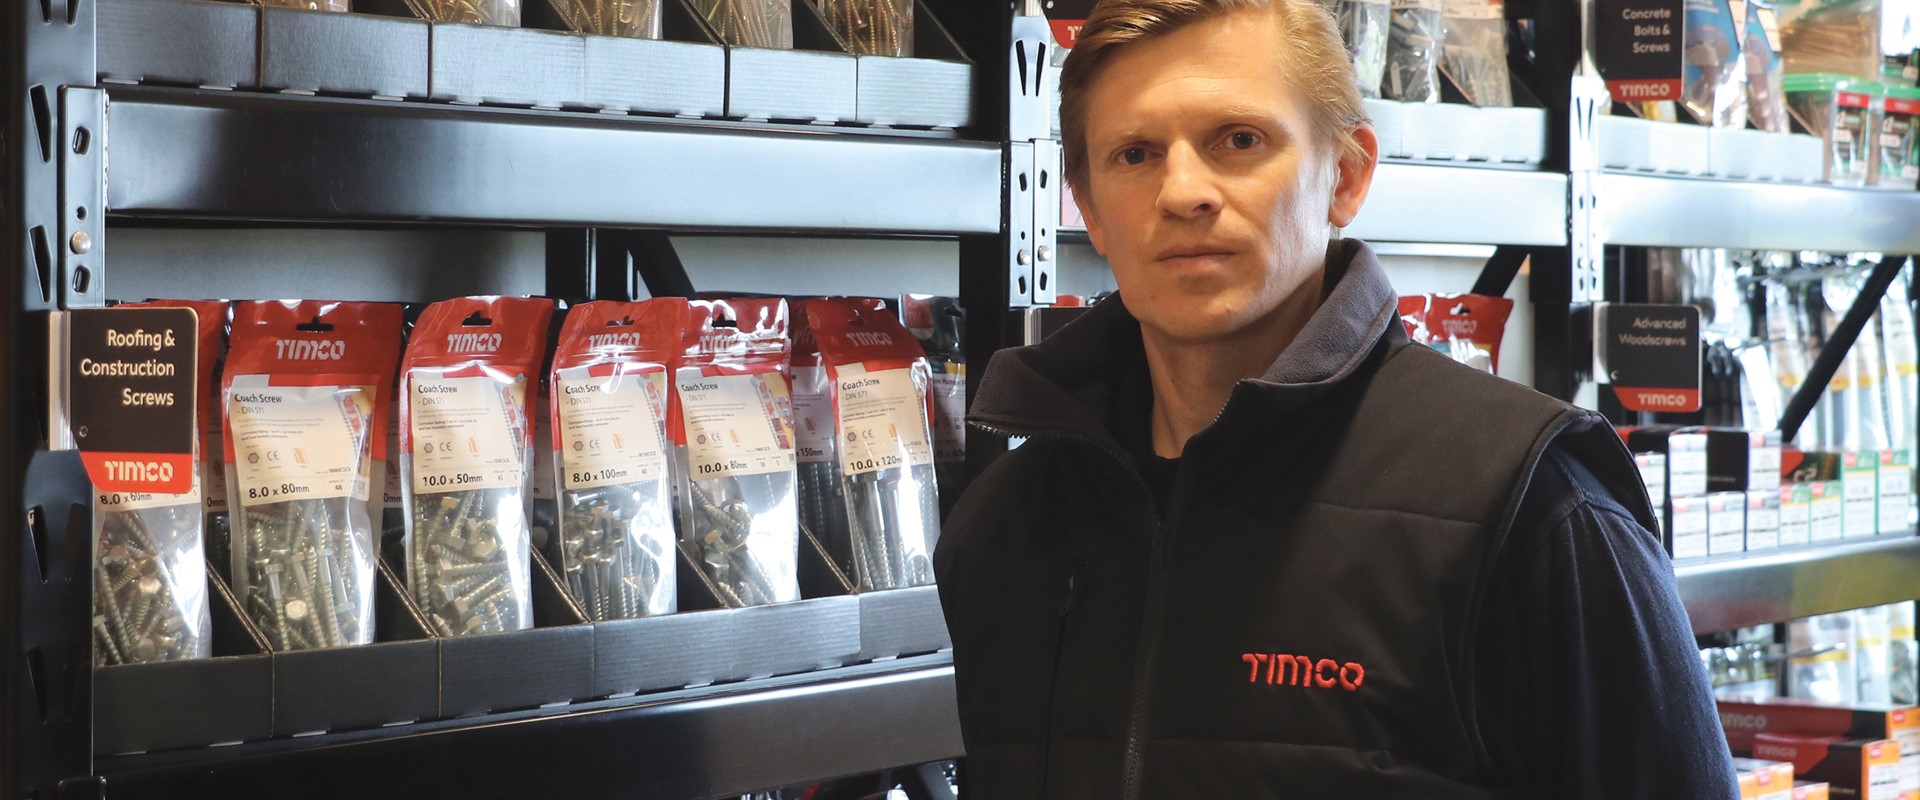 Timco's online sales are up over 500% - their Head of Marketing explains how bd2 support this success.